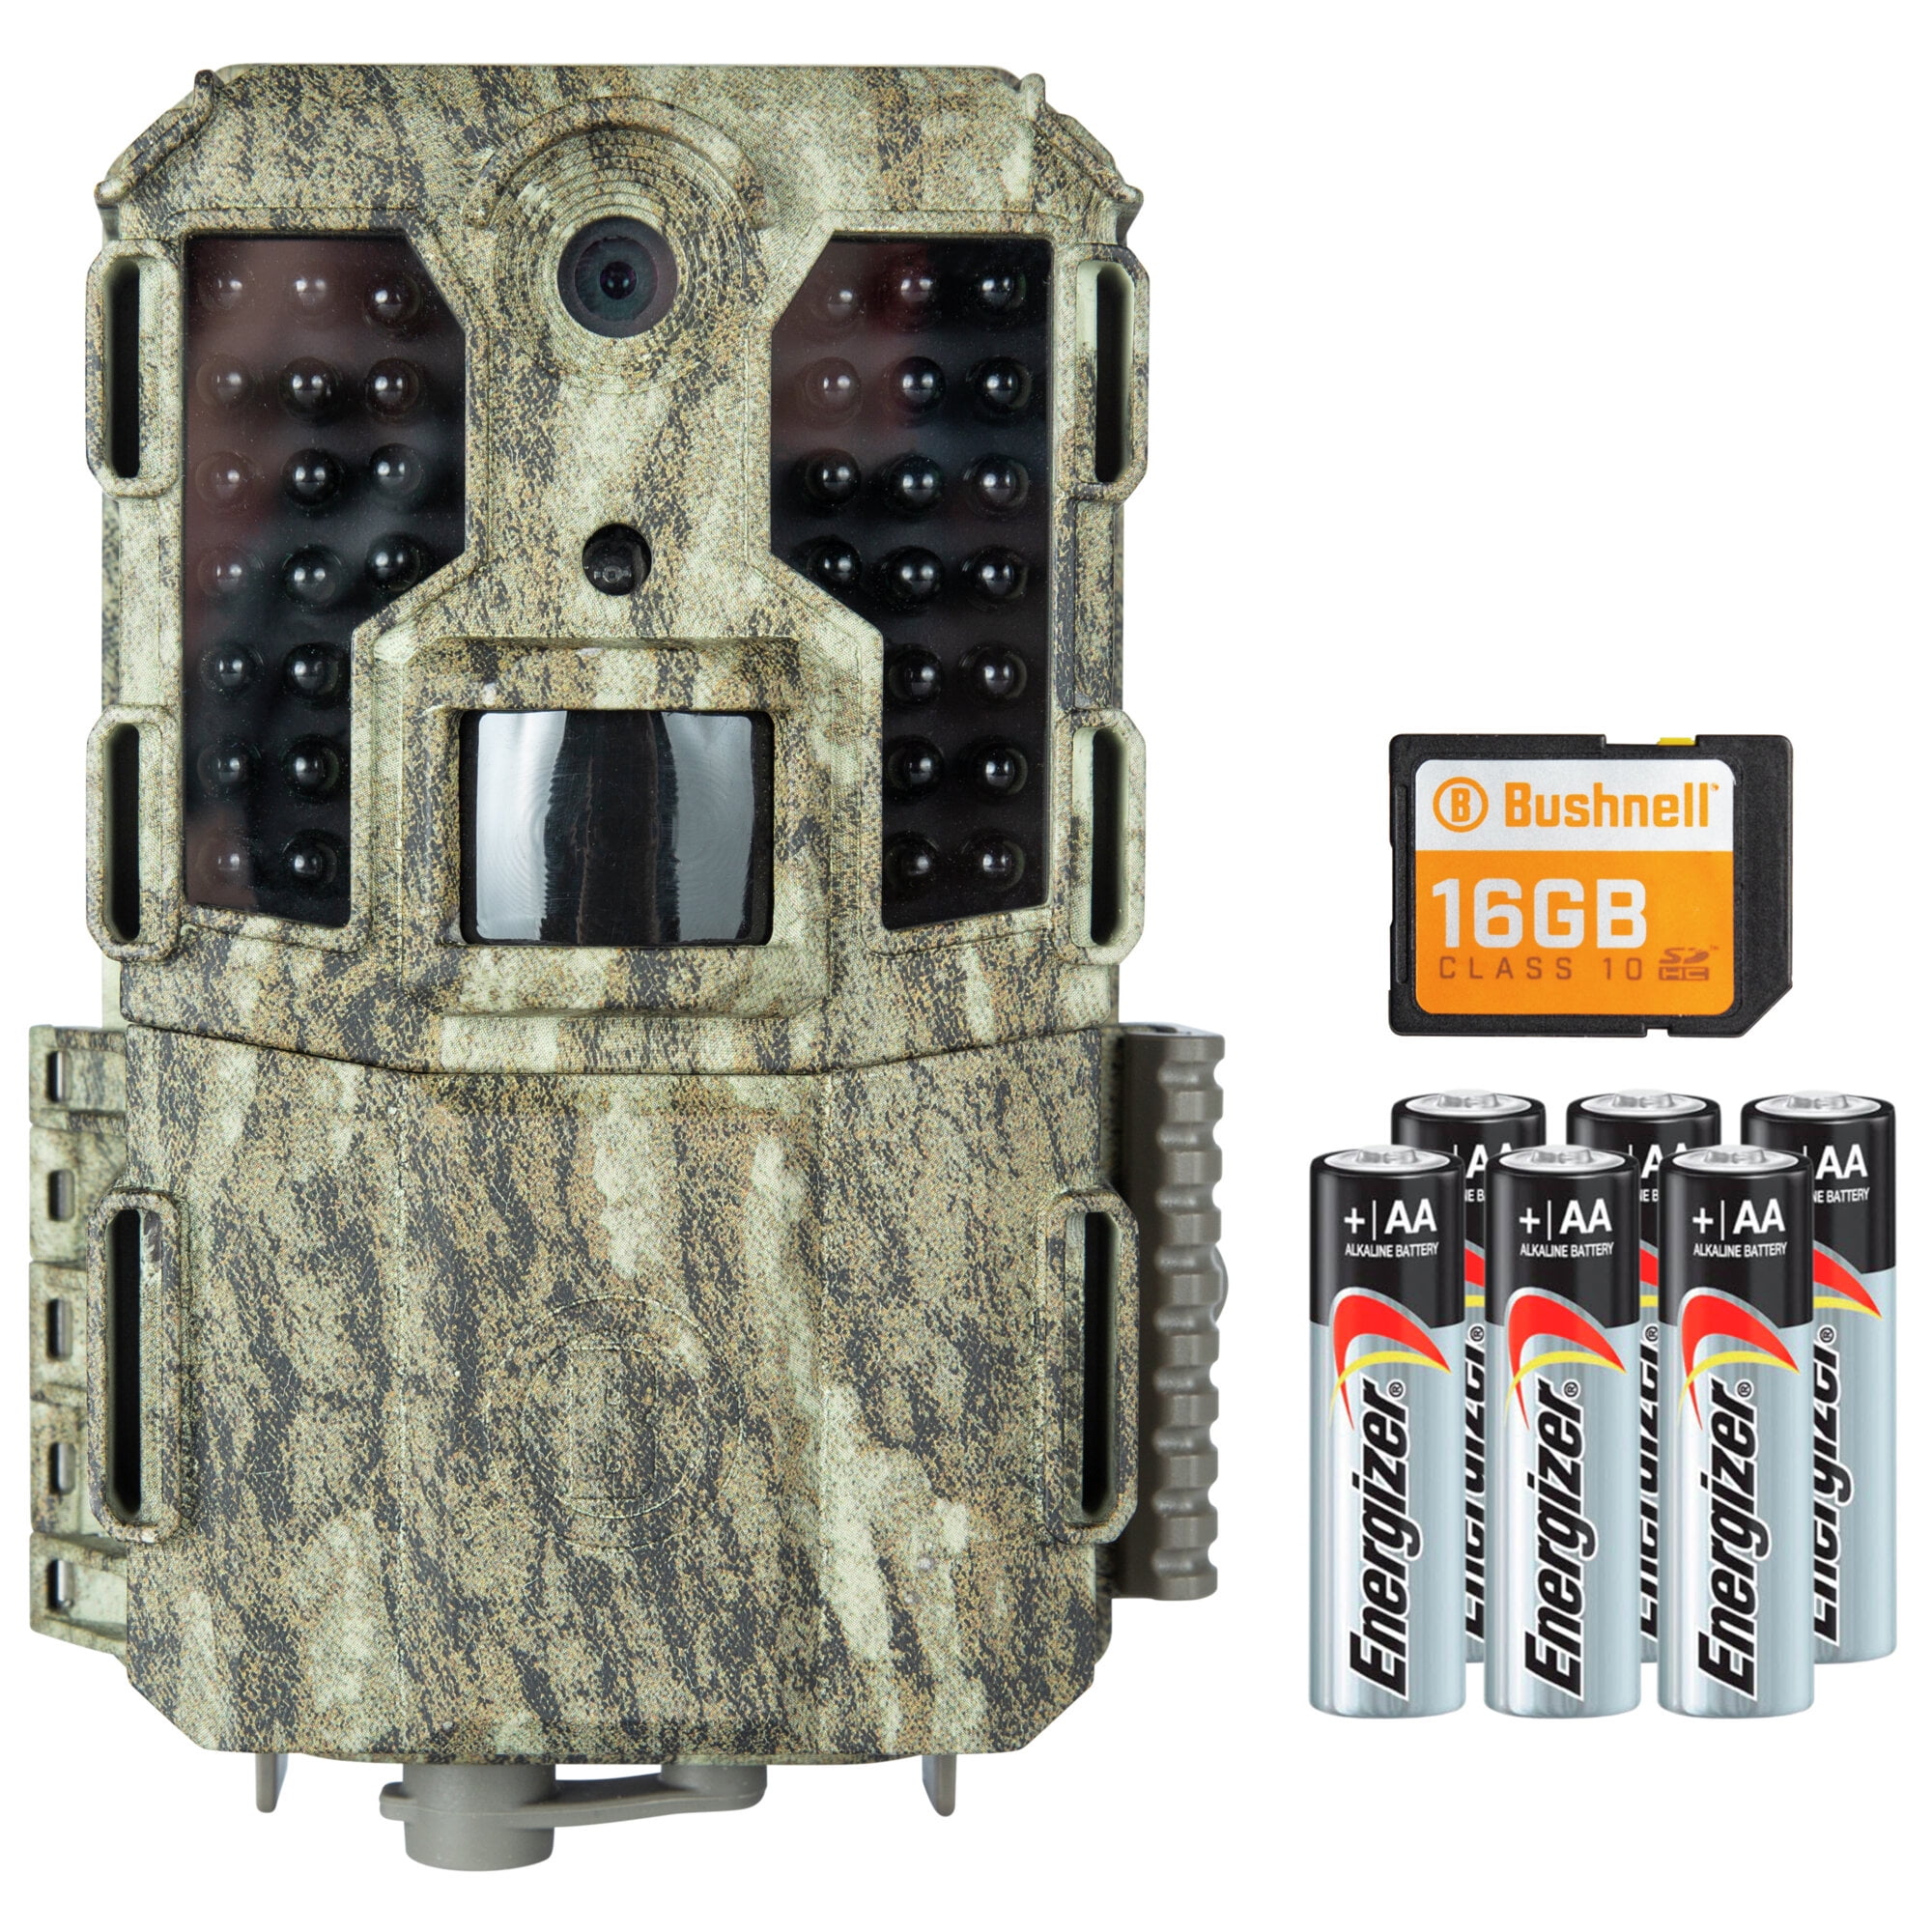 WGICM0724 Wildgame Terra Extreme Lightsout 18MP 60ft Trail Camera - - New! 